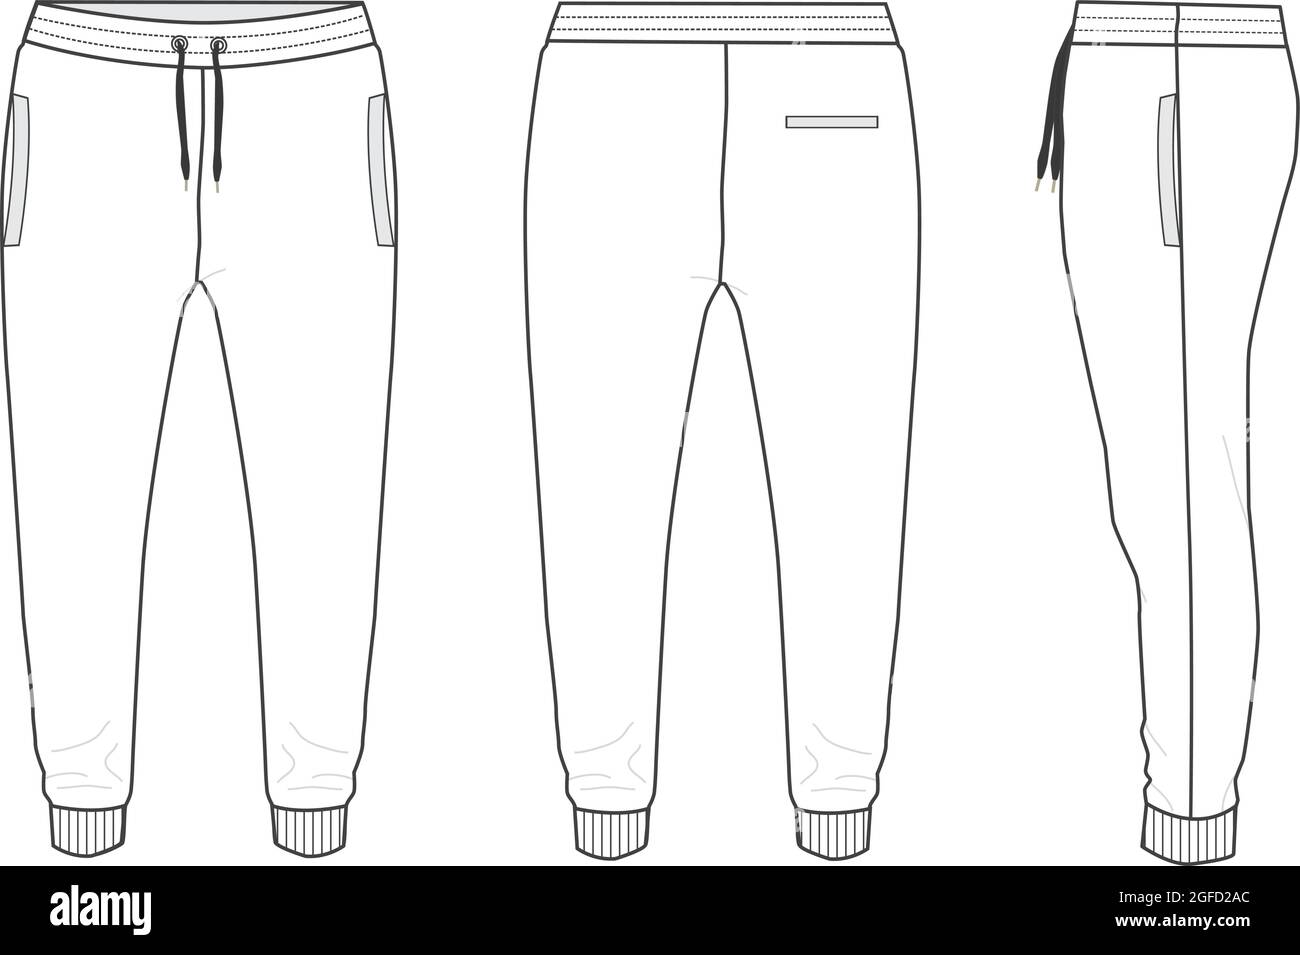 Fleece fabric Jogger Sweatpants overall technical fashion flat sketch vector illustration template front, back and side views. Stock Vector